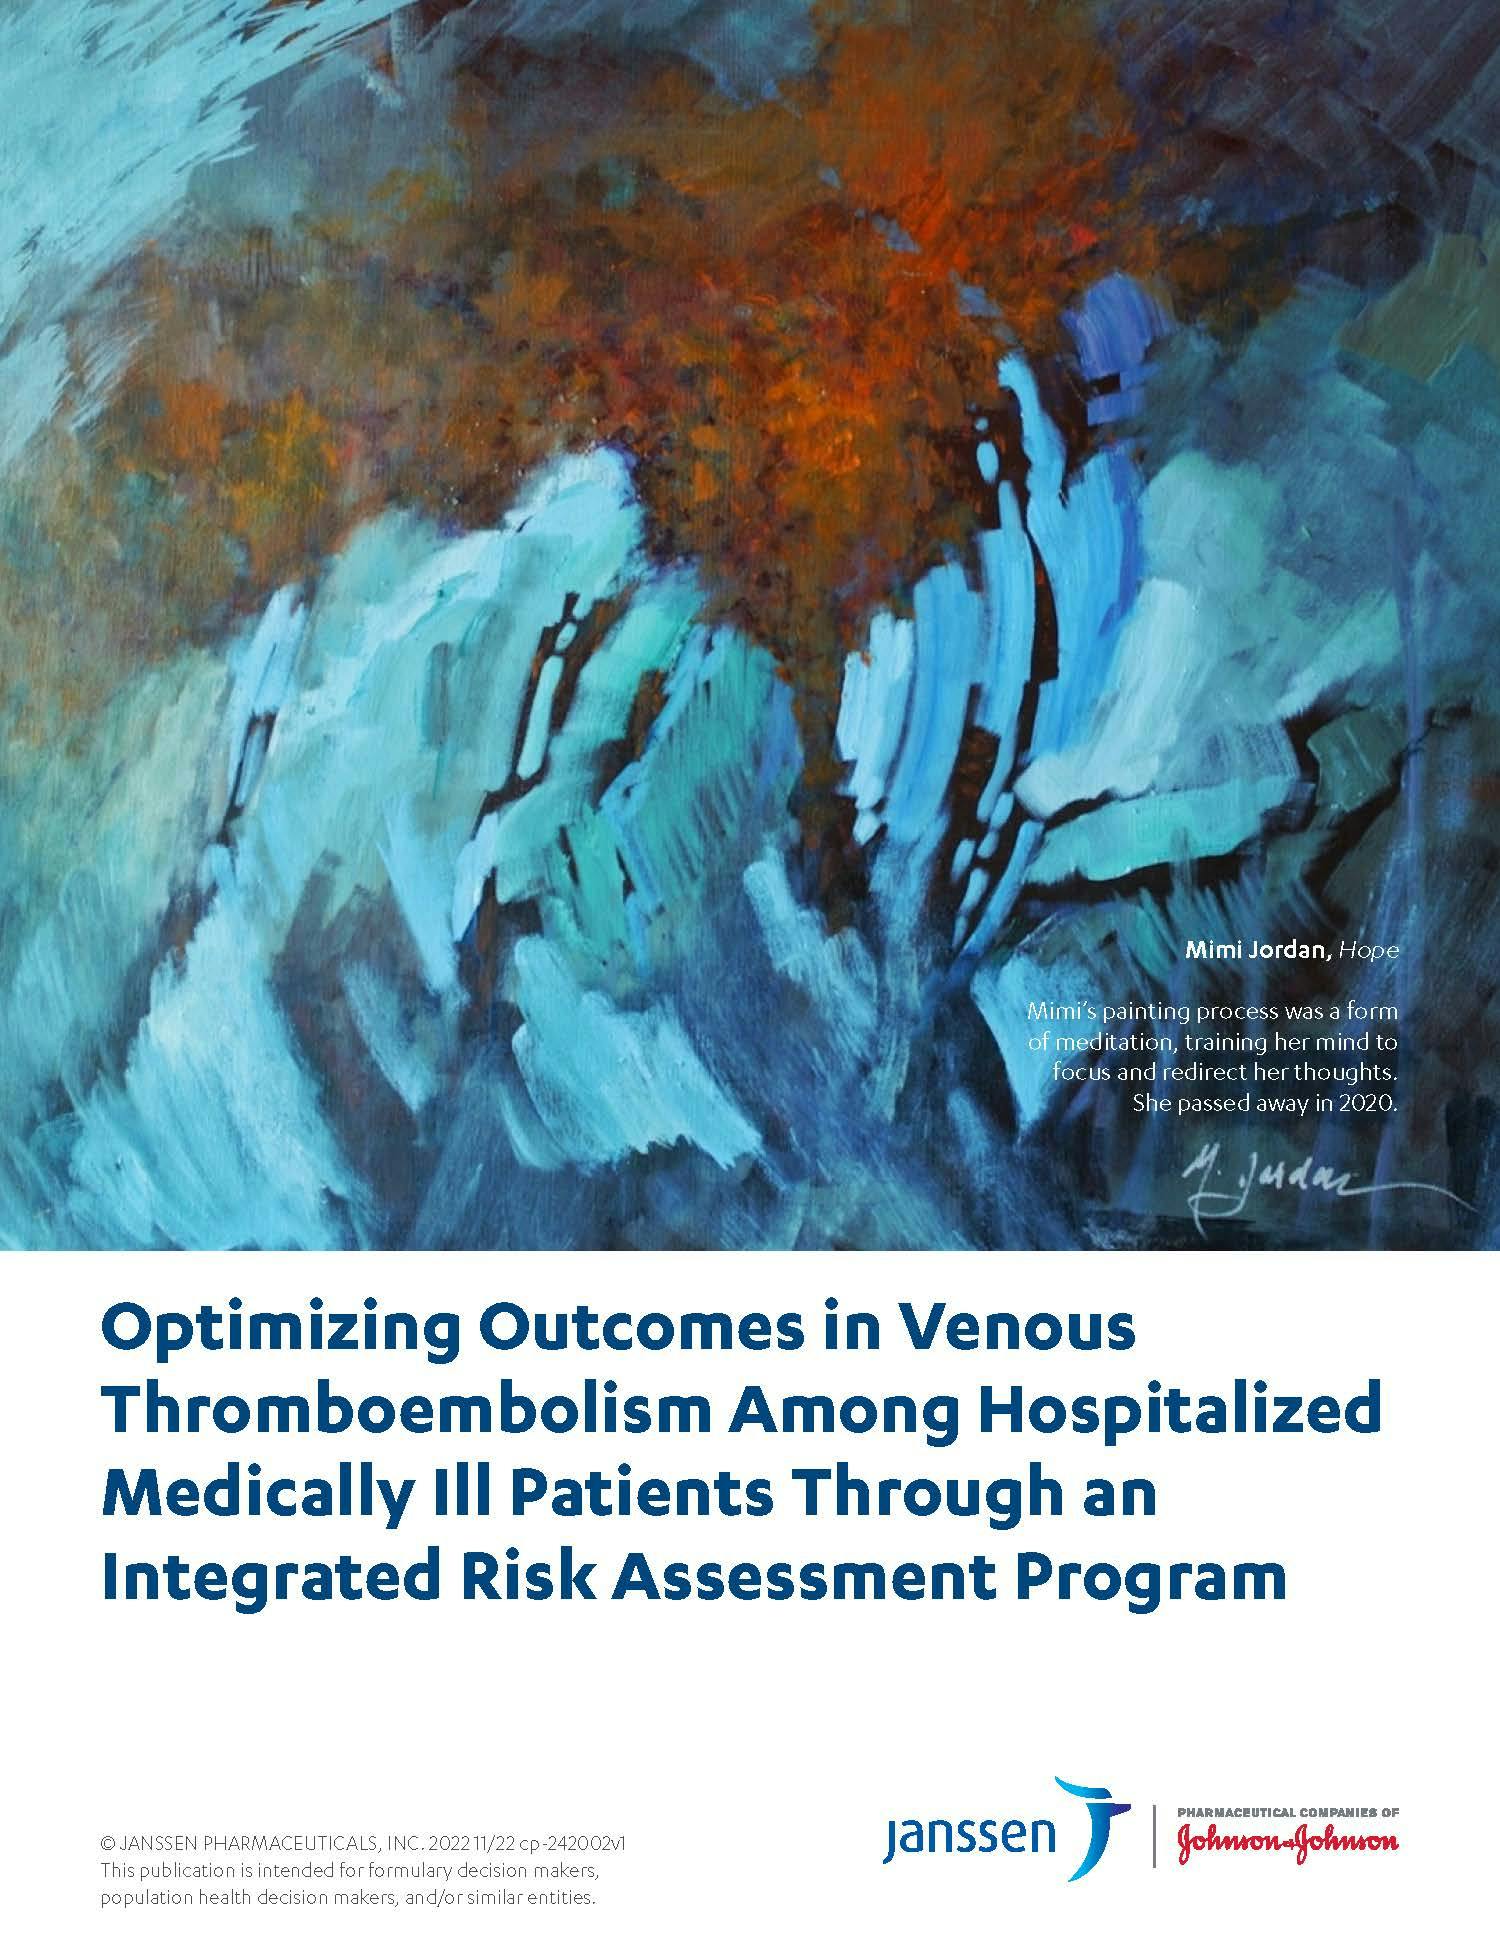 Optimizing Outcomes in Venous Thromboembolism Among Hospitalized Medically Ill Patients Through an Integrated Risk Assessment Program